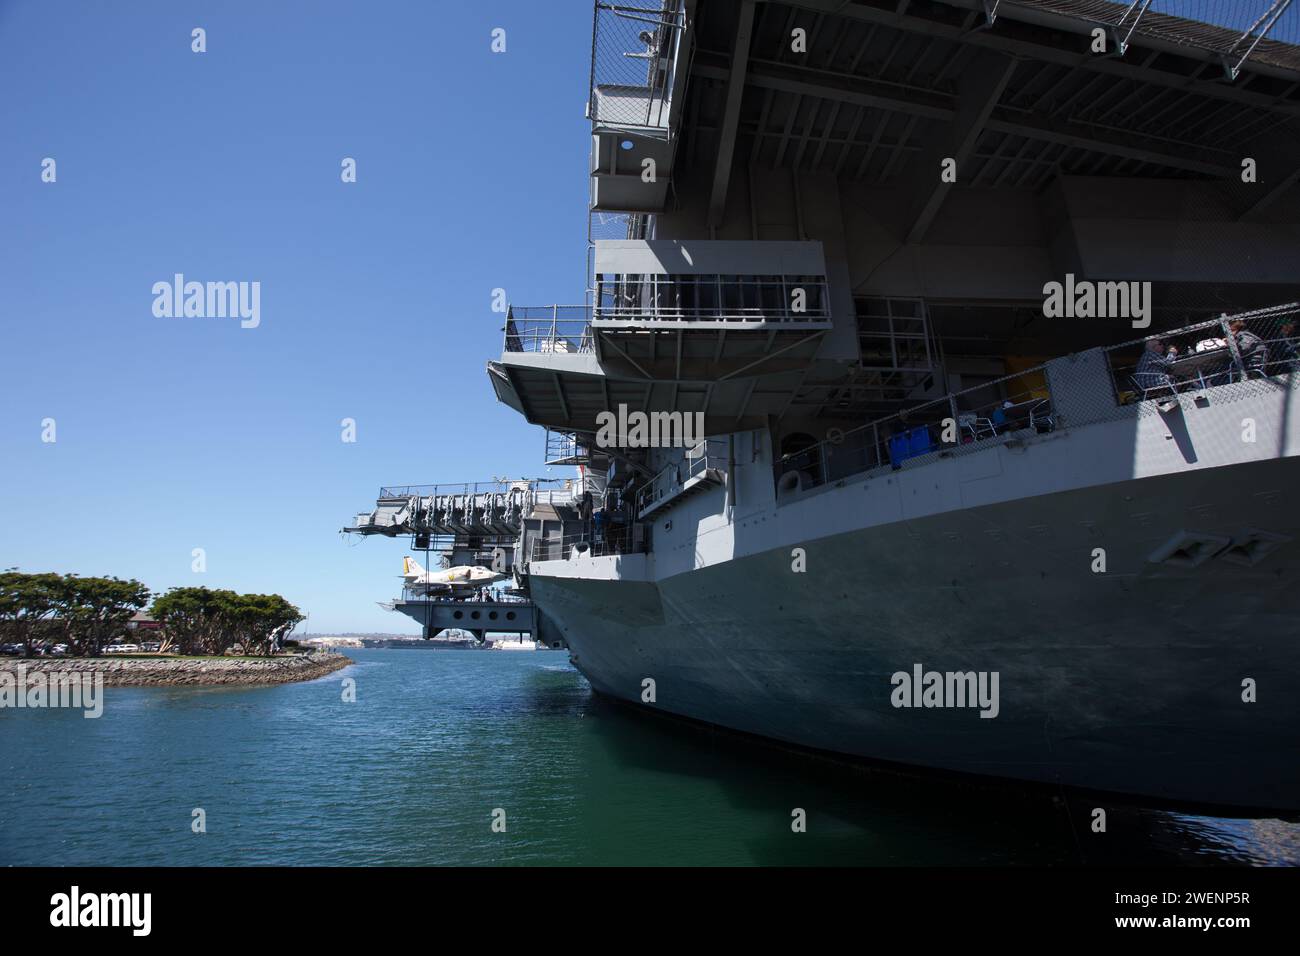 USS Midway (CVB/CVA/CV-41) is an aircraft carrier, formerly of the United States Navy, the lead ship of her class. Now a museum ship in San Diego. Stock Photo